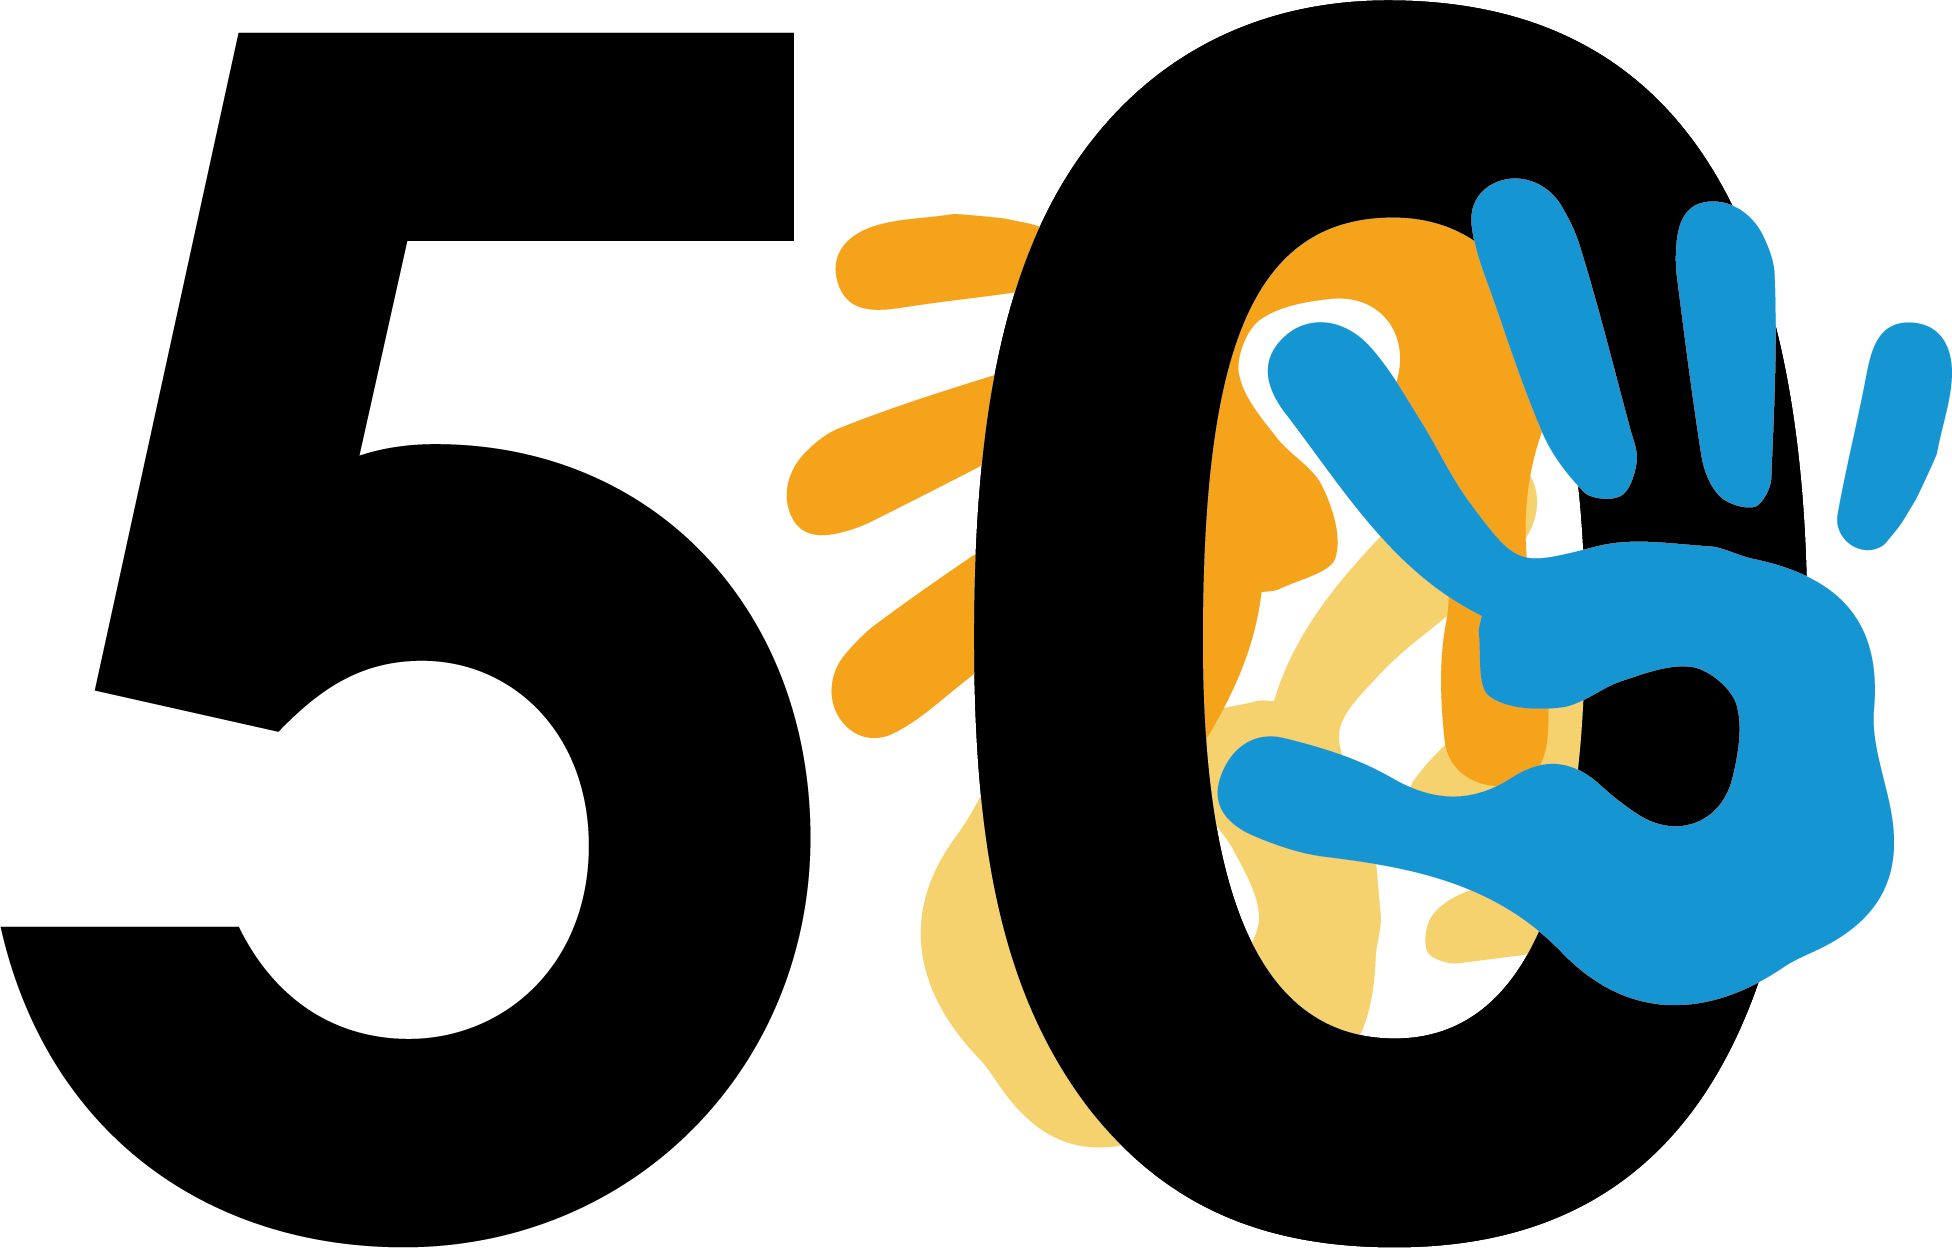 Latham Primary 50th Anniversary logo - the logo resembles three hands over a 50